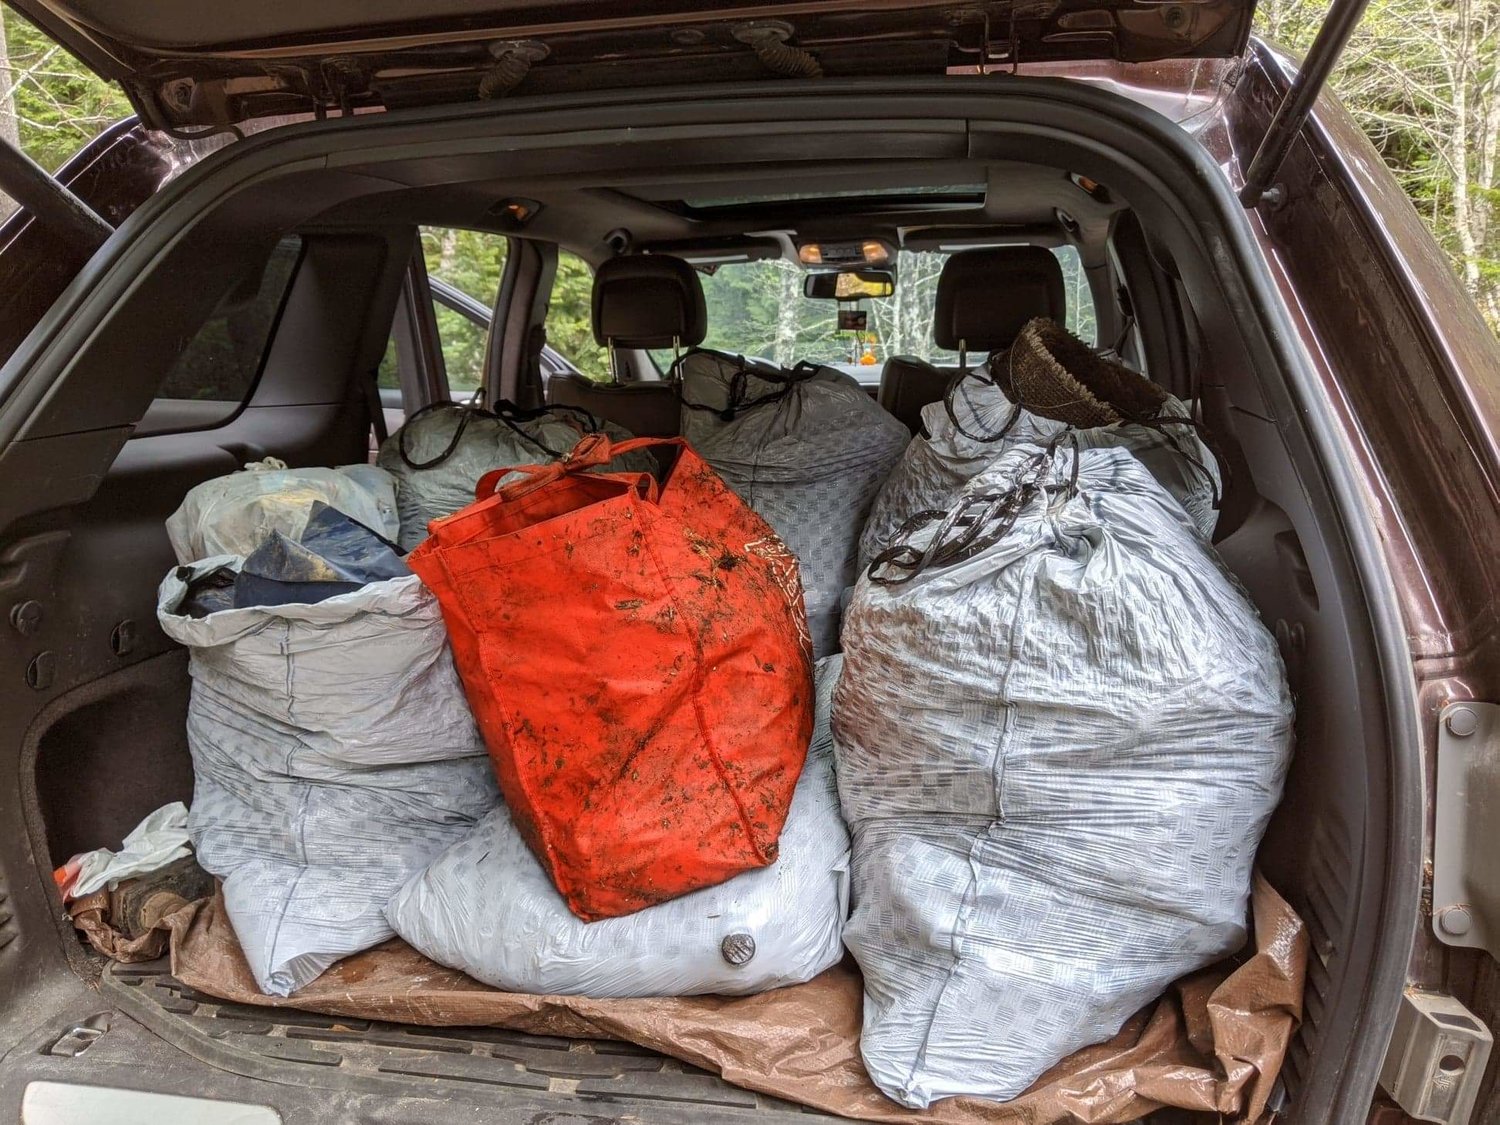 Trash bags are stuffed inside the back of a volunteer’s vehicle during a cleanup.